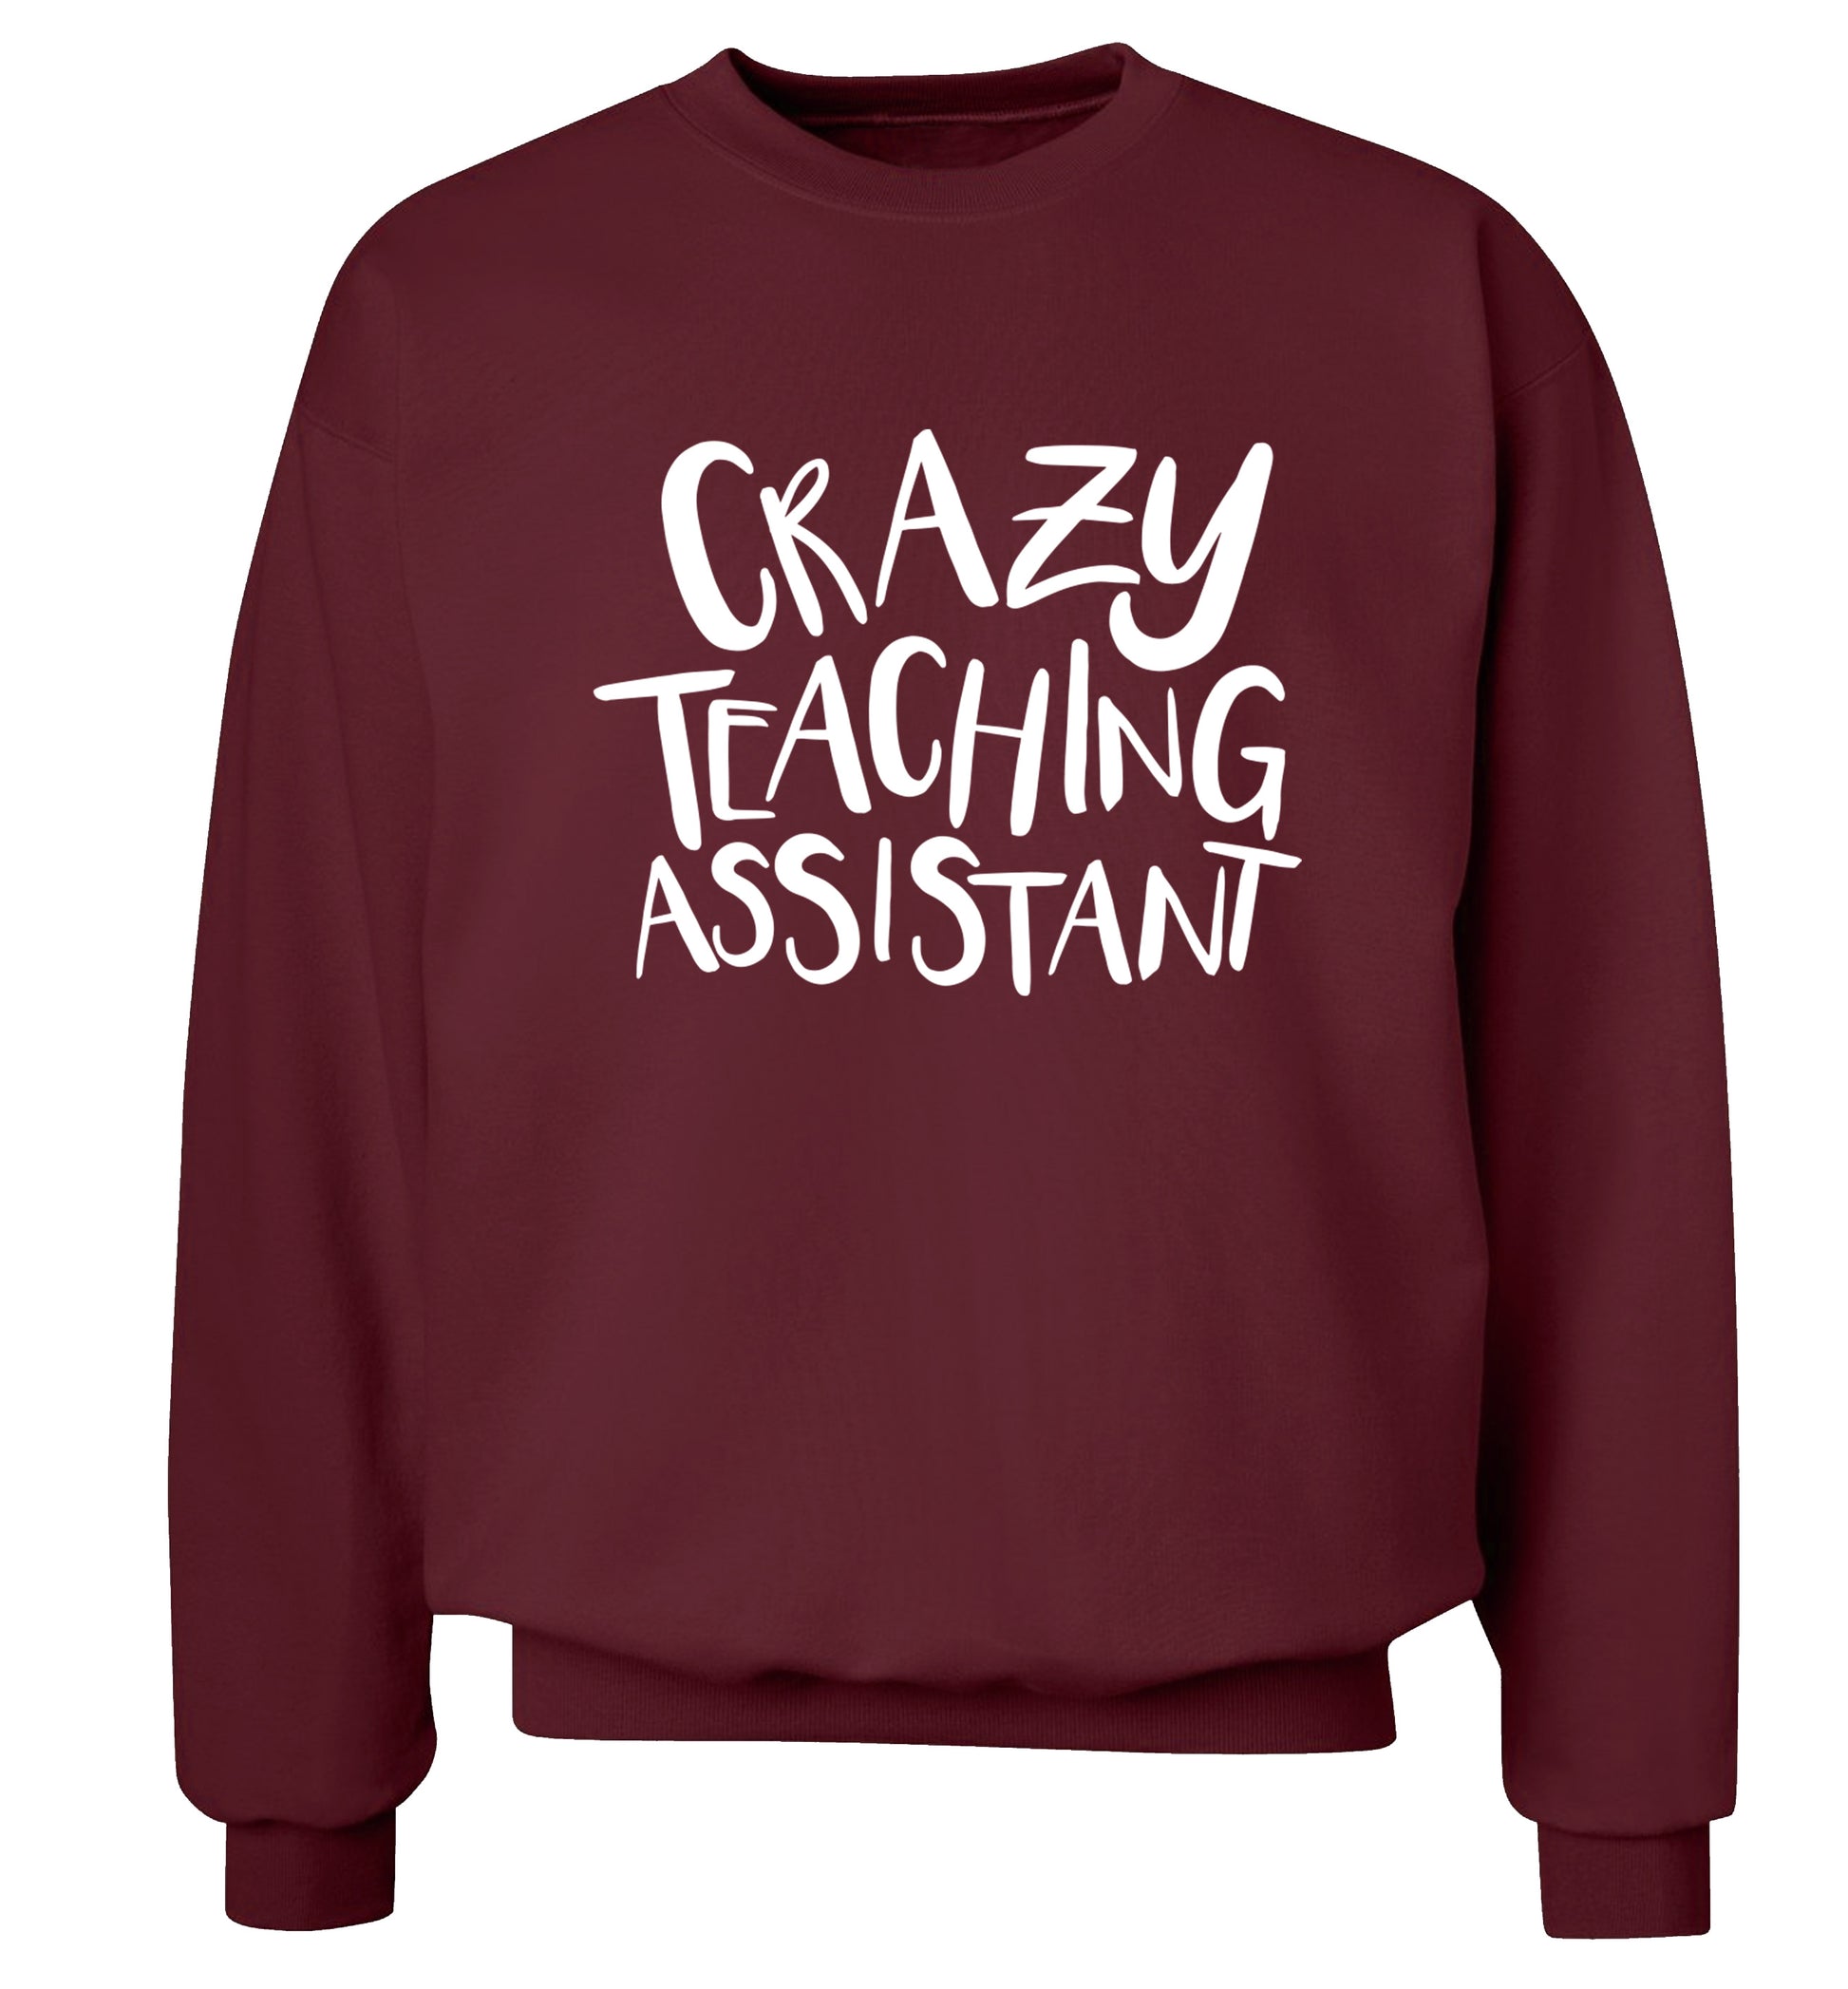 Crazy Teaching Assistant Adult's unisex maroon Sweater 2XL